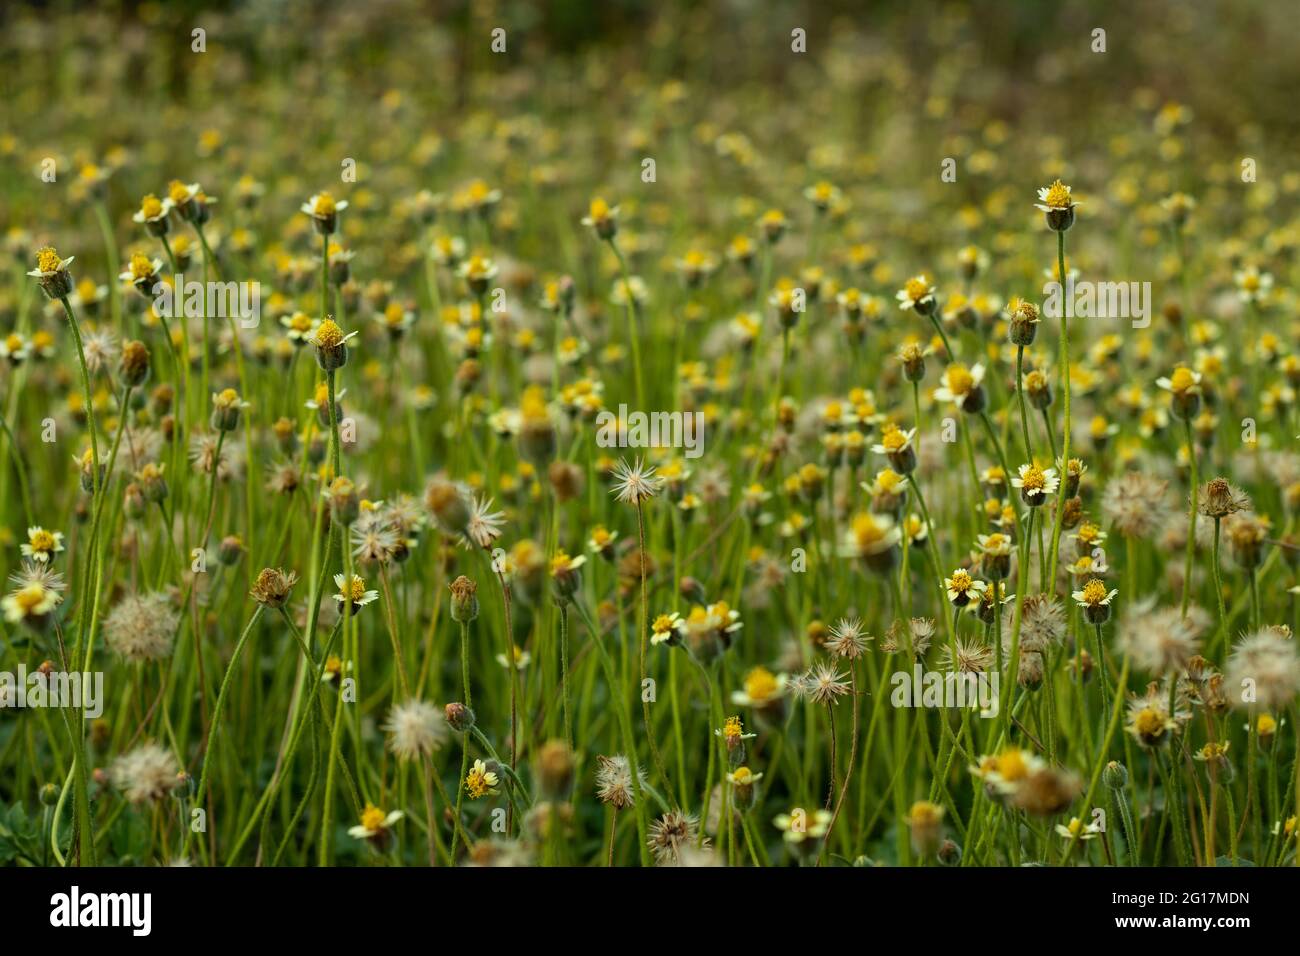 Coat Buttons flower or it is commonly known as coat buttons or Tridax daisy, is a species of flowering plants in daisy family Stock Photo